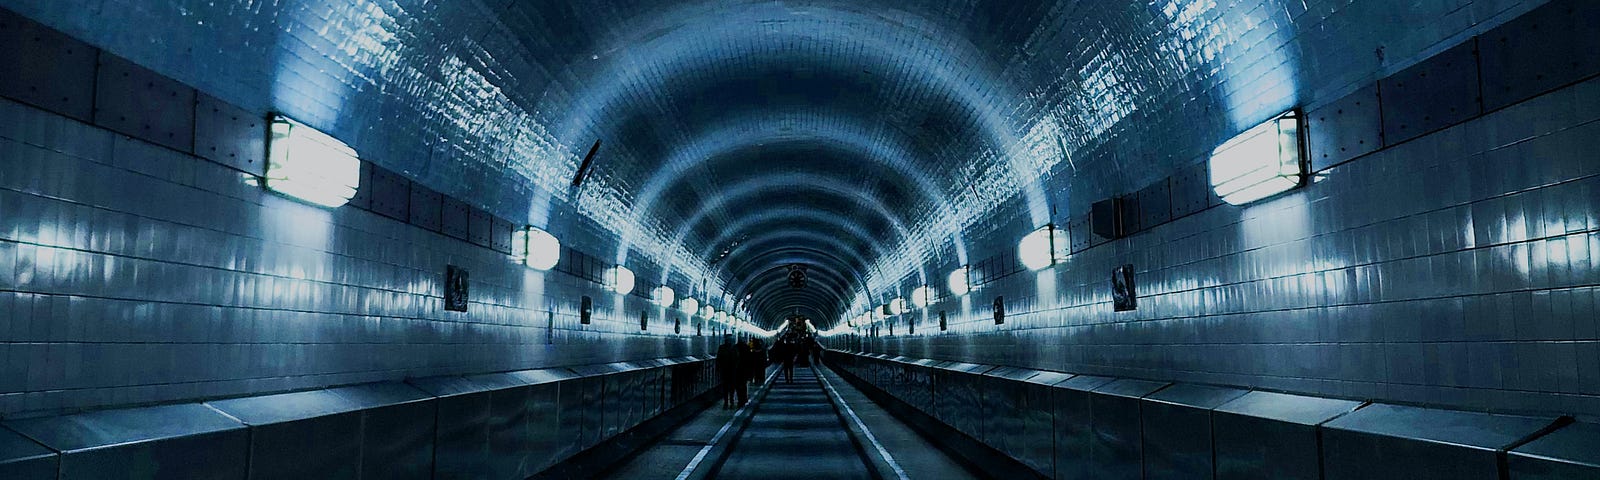 Track-level view of a subway tunnel perspective receding into the distance, with perimeter lights along the path